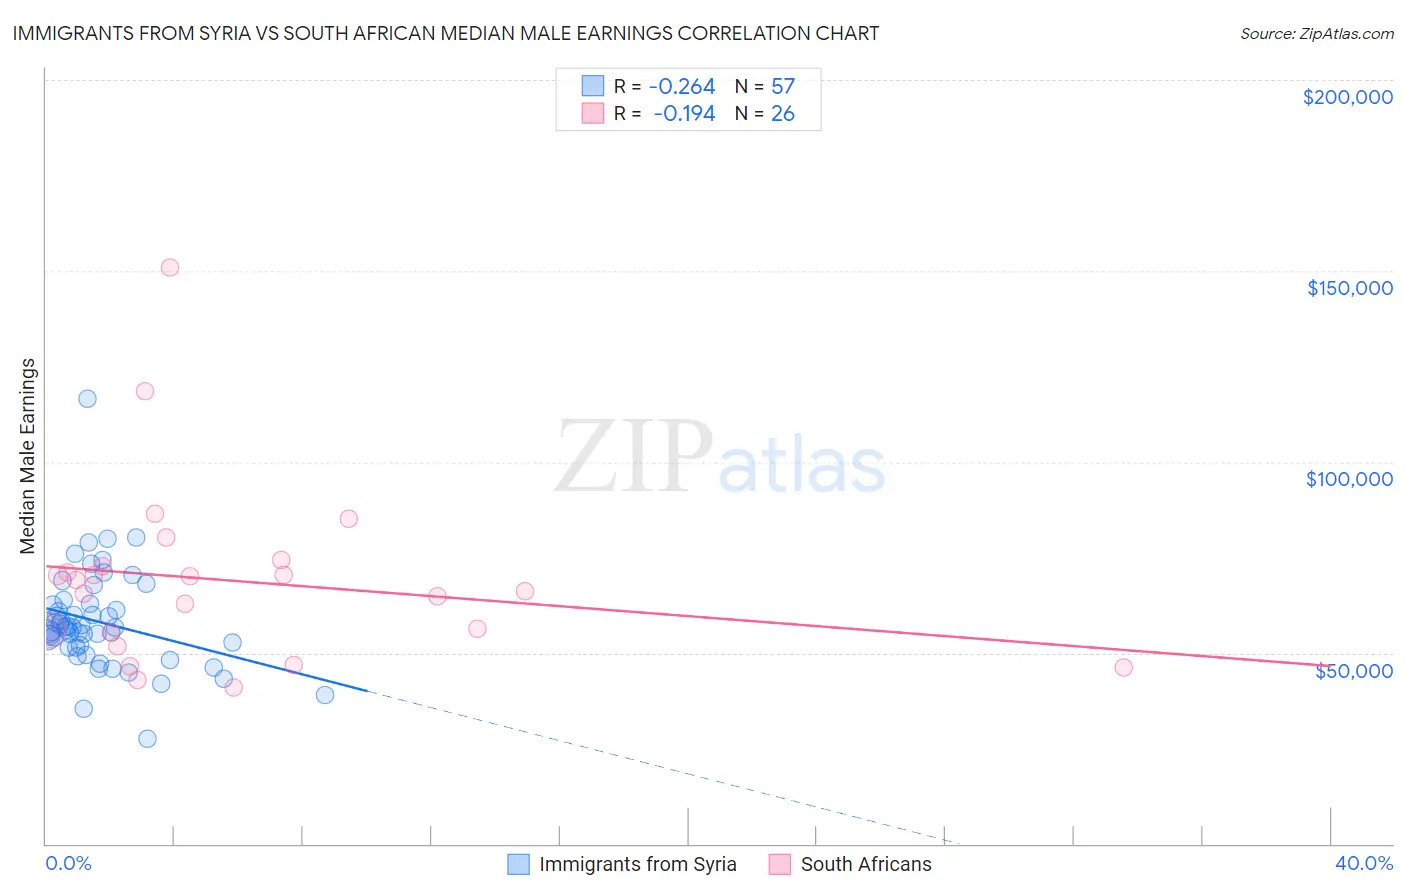 Immigrants from Syria vs South African Median Male Earnings